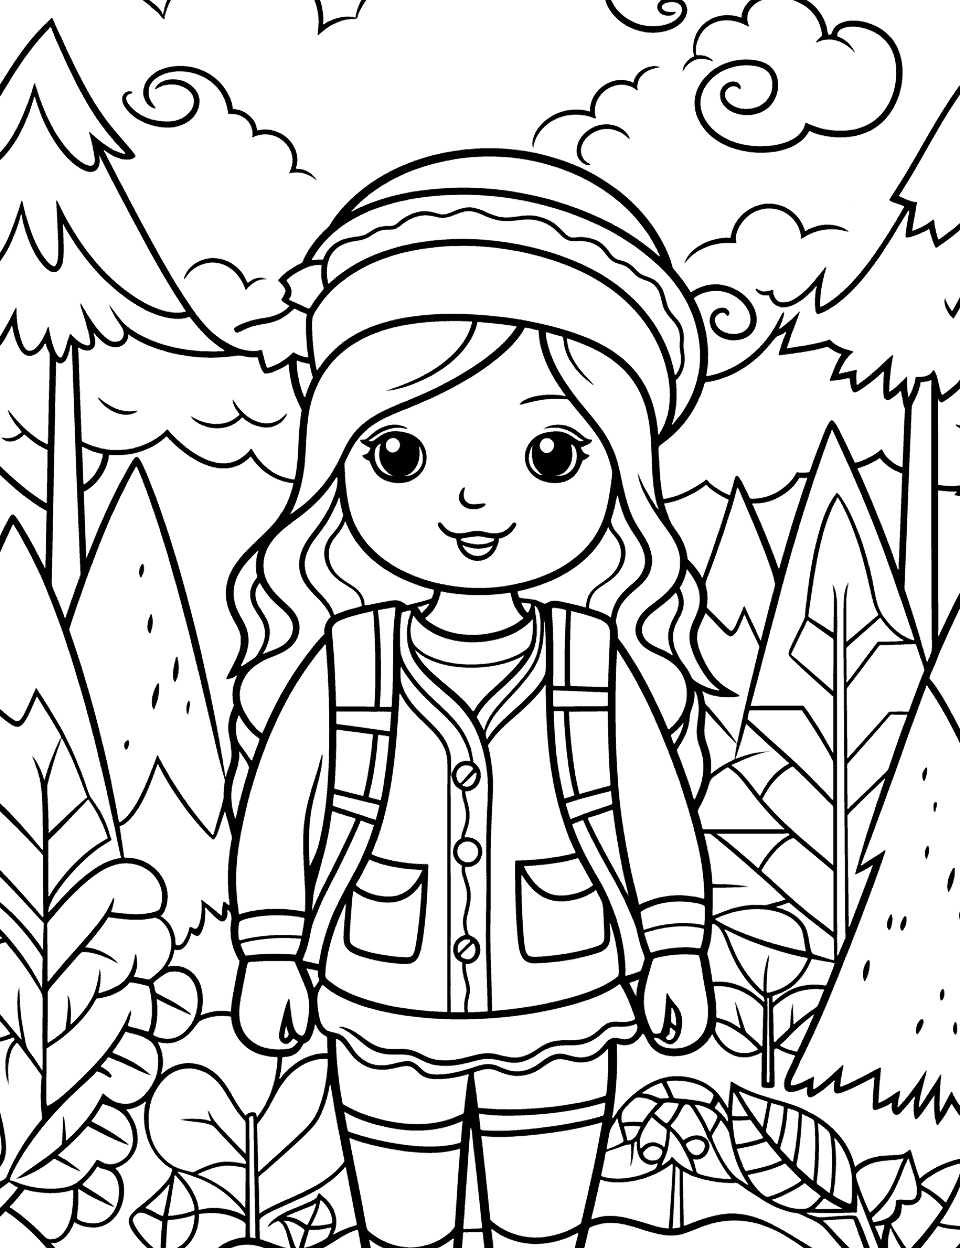 Kawaii Forest Adventure Adult Coloring Page - Cute, kawaii-style character on an adventure through a forest, surrounded by tiny trees.